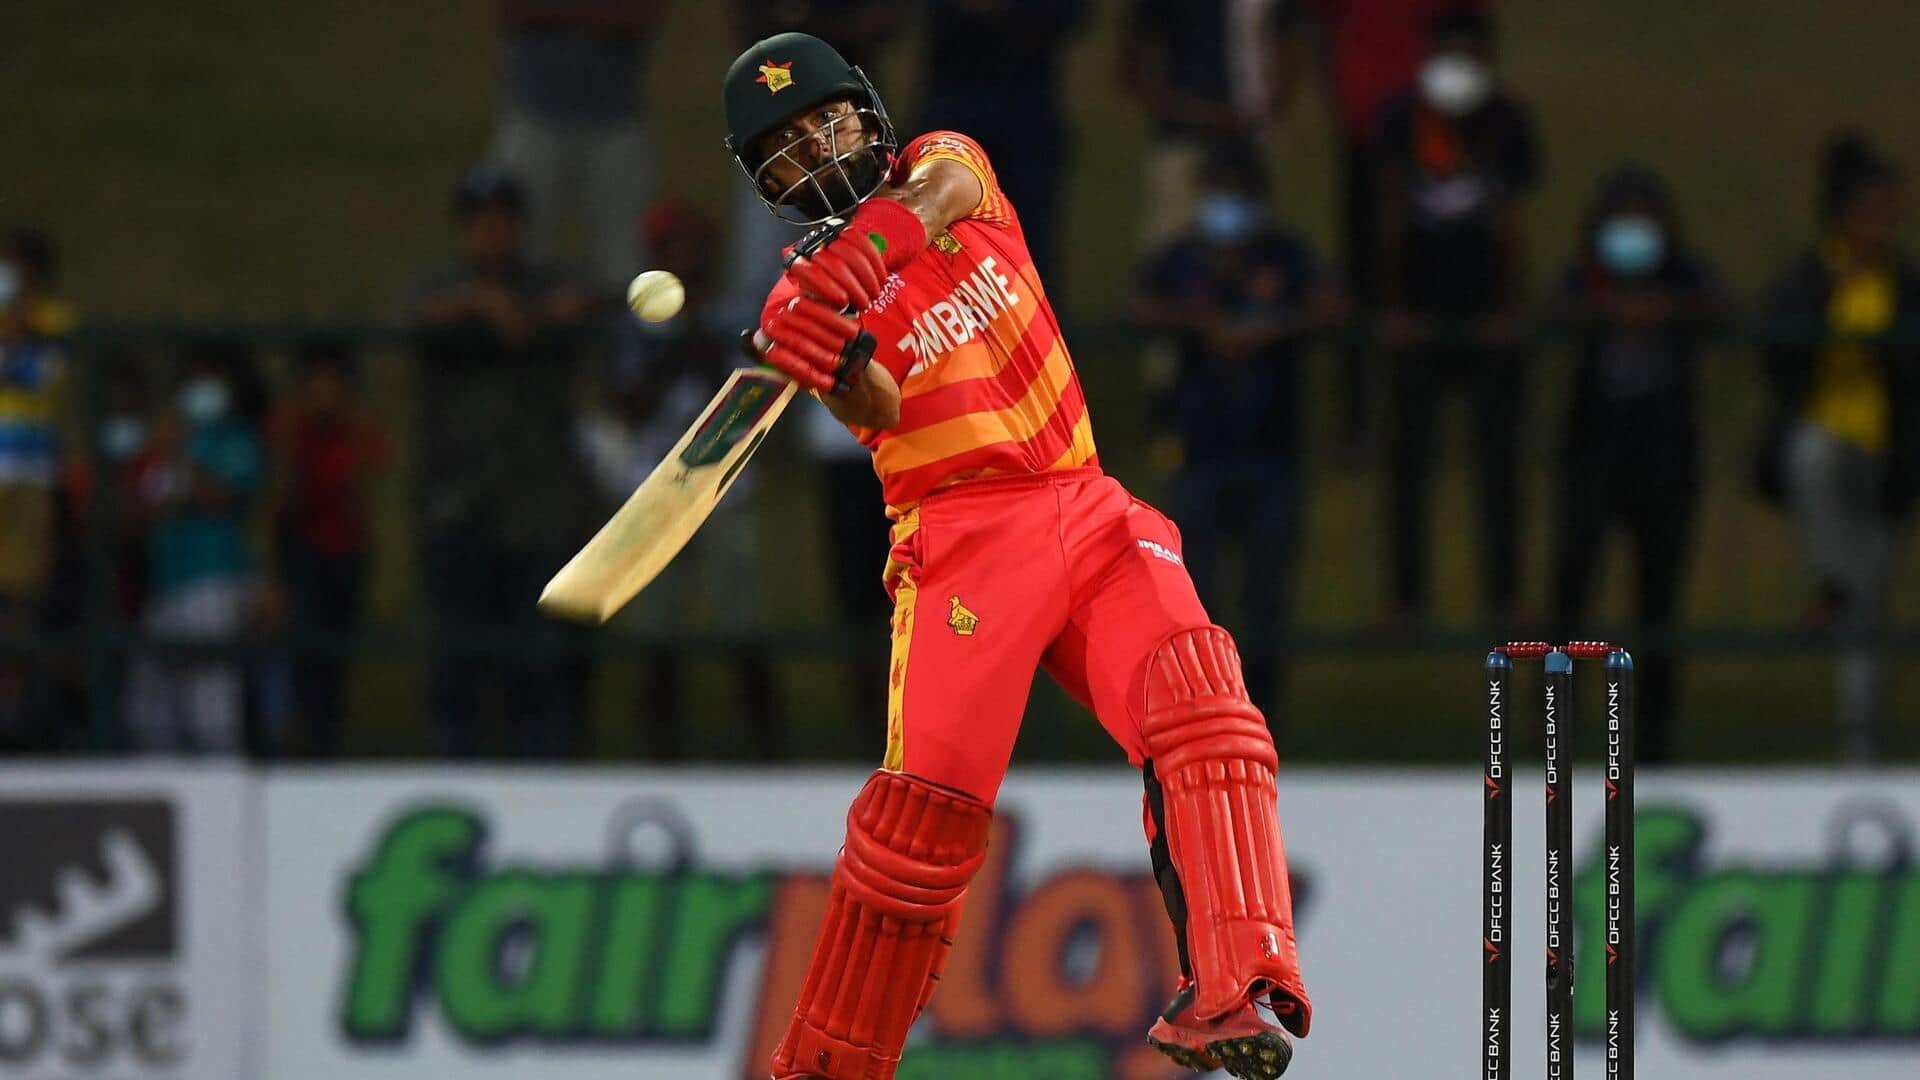 Sikandar Raza owns joint-second-most POTM awards in T20Is: Details